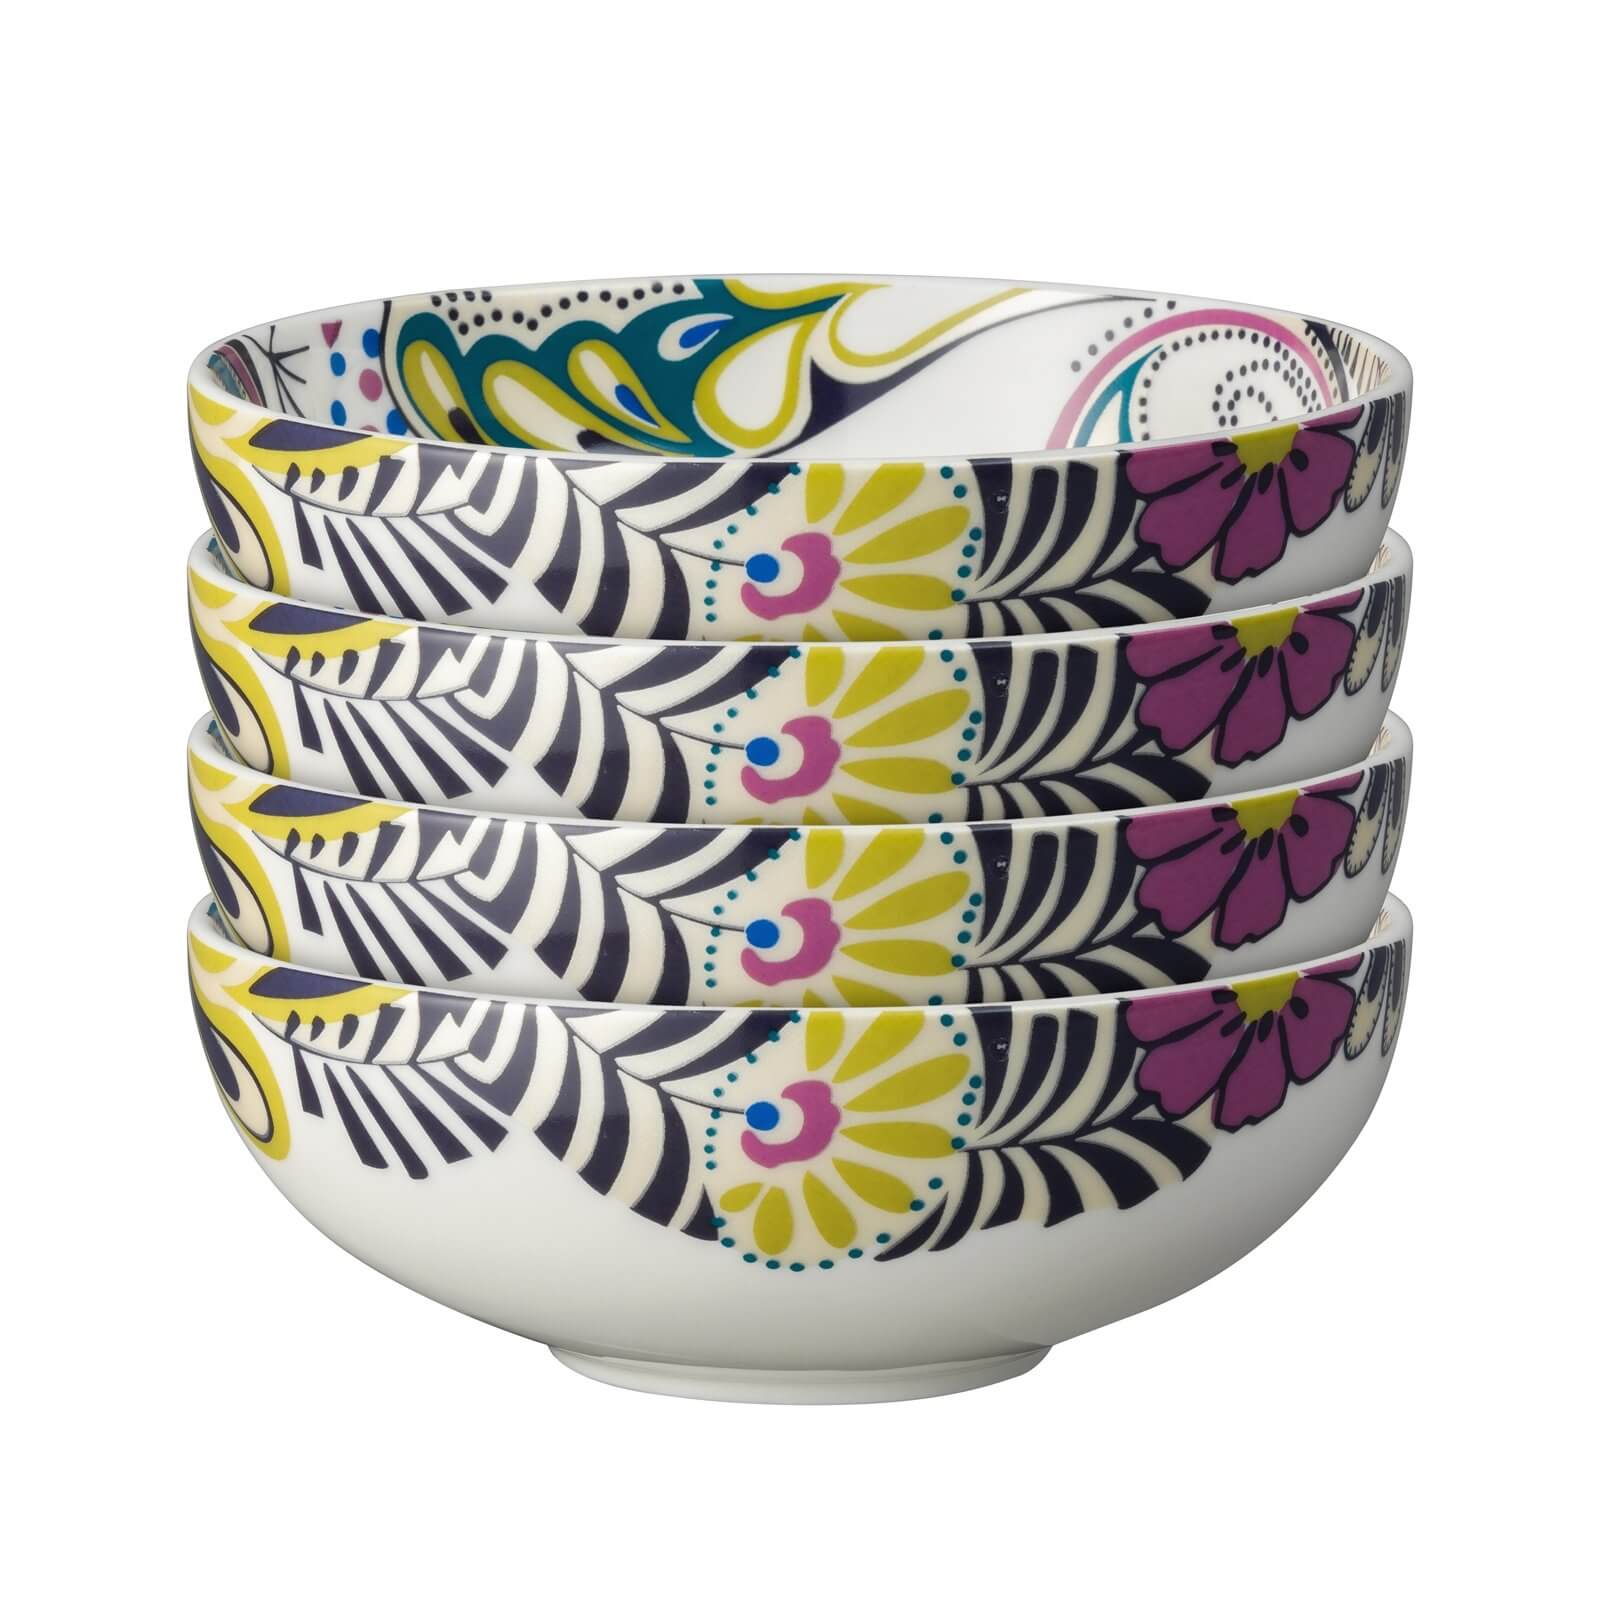 Denby Monsoon Cosmic Cereal Bowls - 4 Piece Set